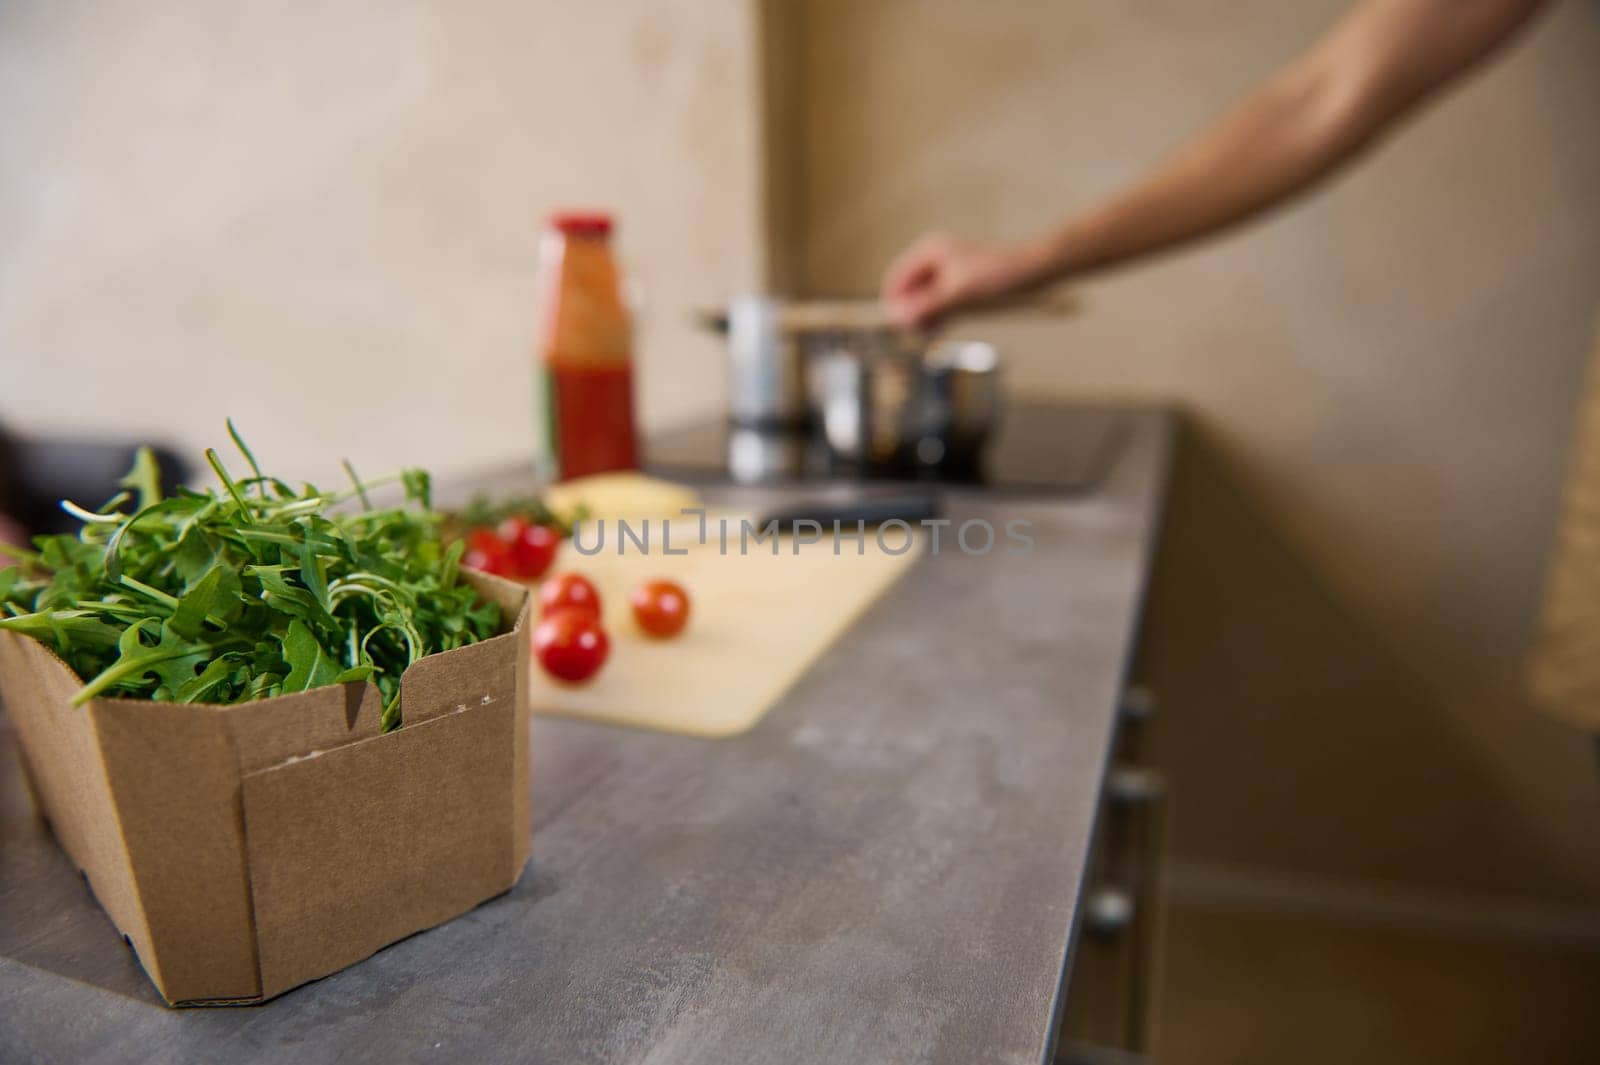 Healthy fresh organic arugula herbs in cardboard box, ingredients and blurred stainless steel pan on electric stove in the home kitchen interior. Healthy ingredients for Mediterranean lunch. Culinary.